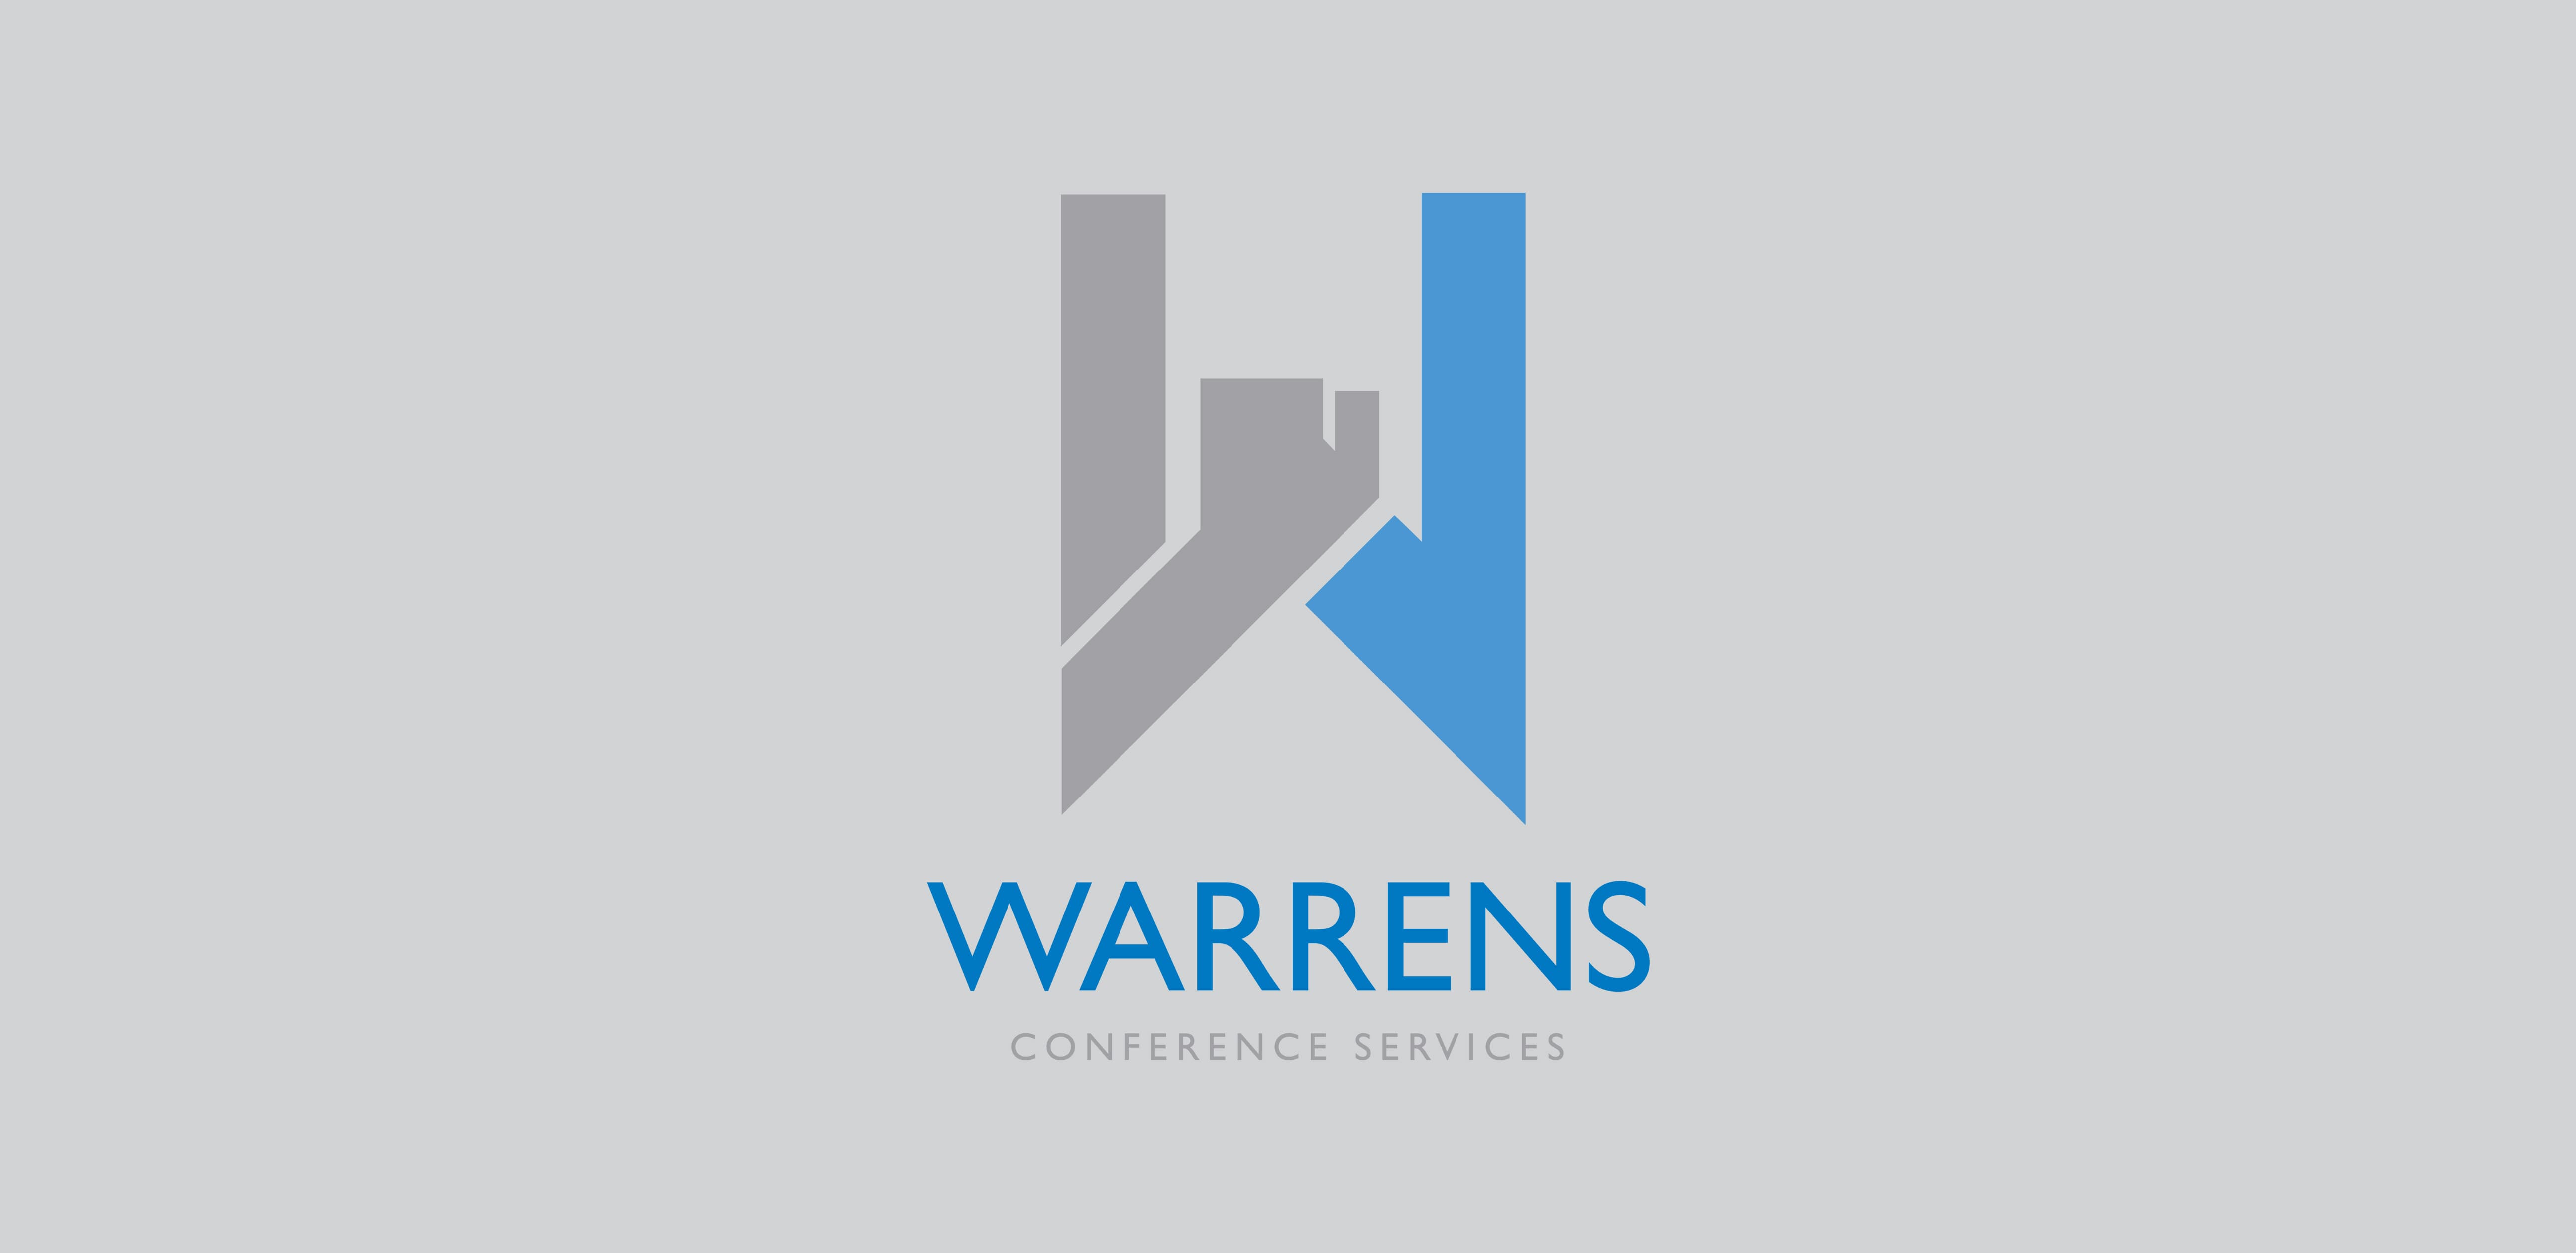 WARRENS CONFERENCE-SERVICES-LOGO